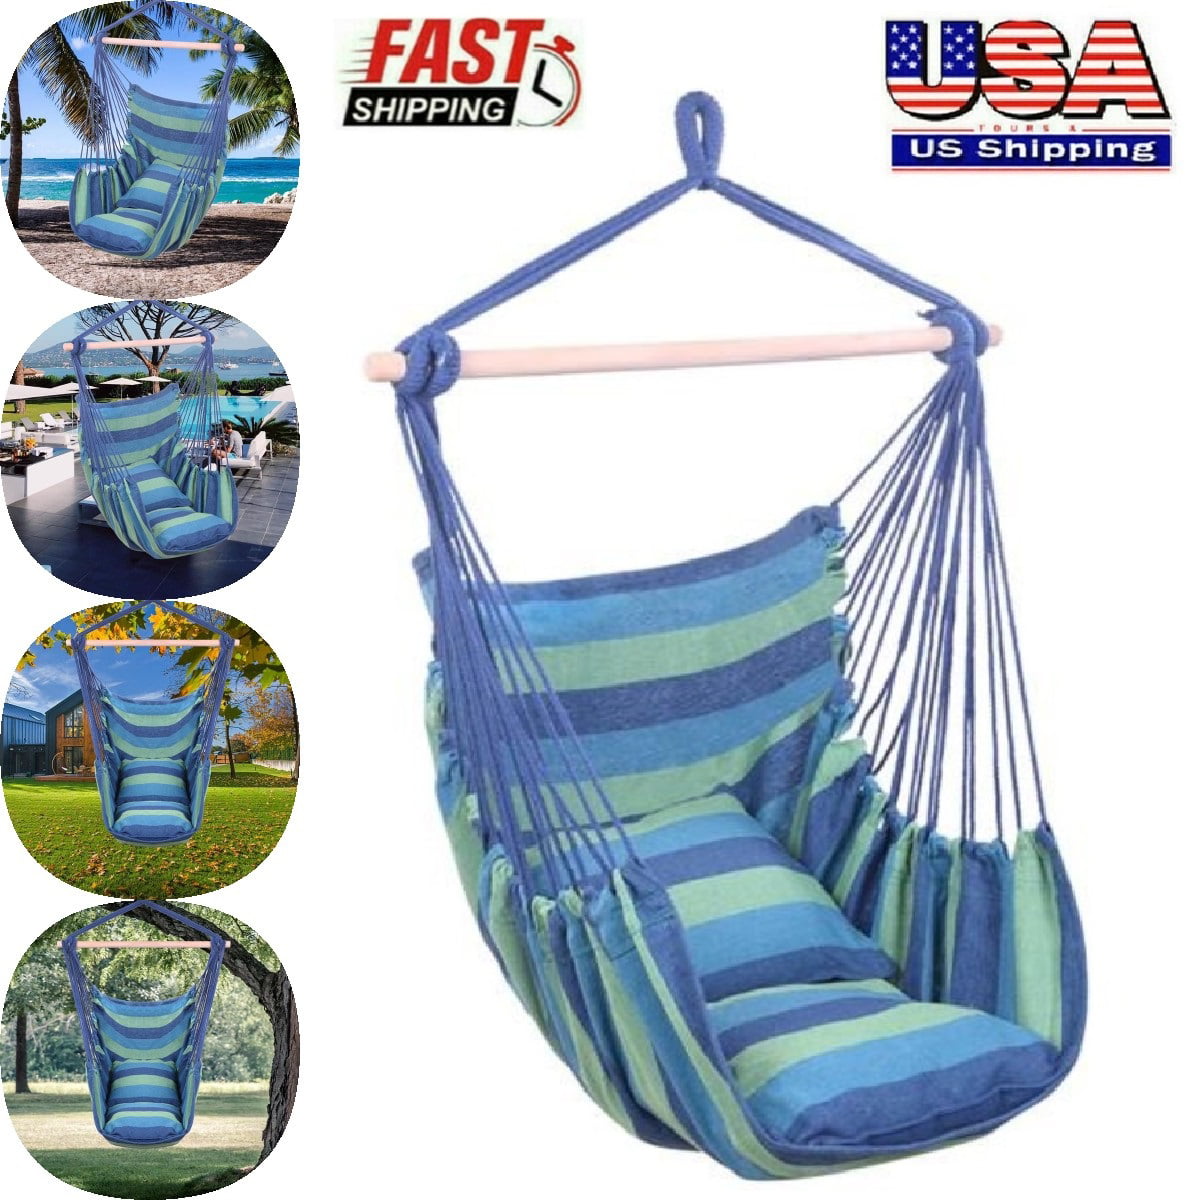 Hammock Hanging Rope Chair Swing Seat Patio Camping /w 2 Pillows Blue US 